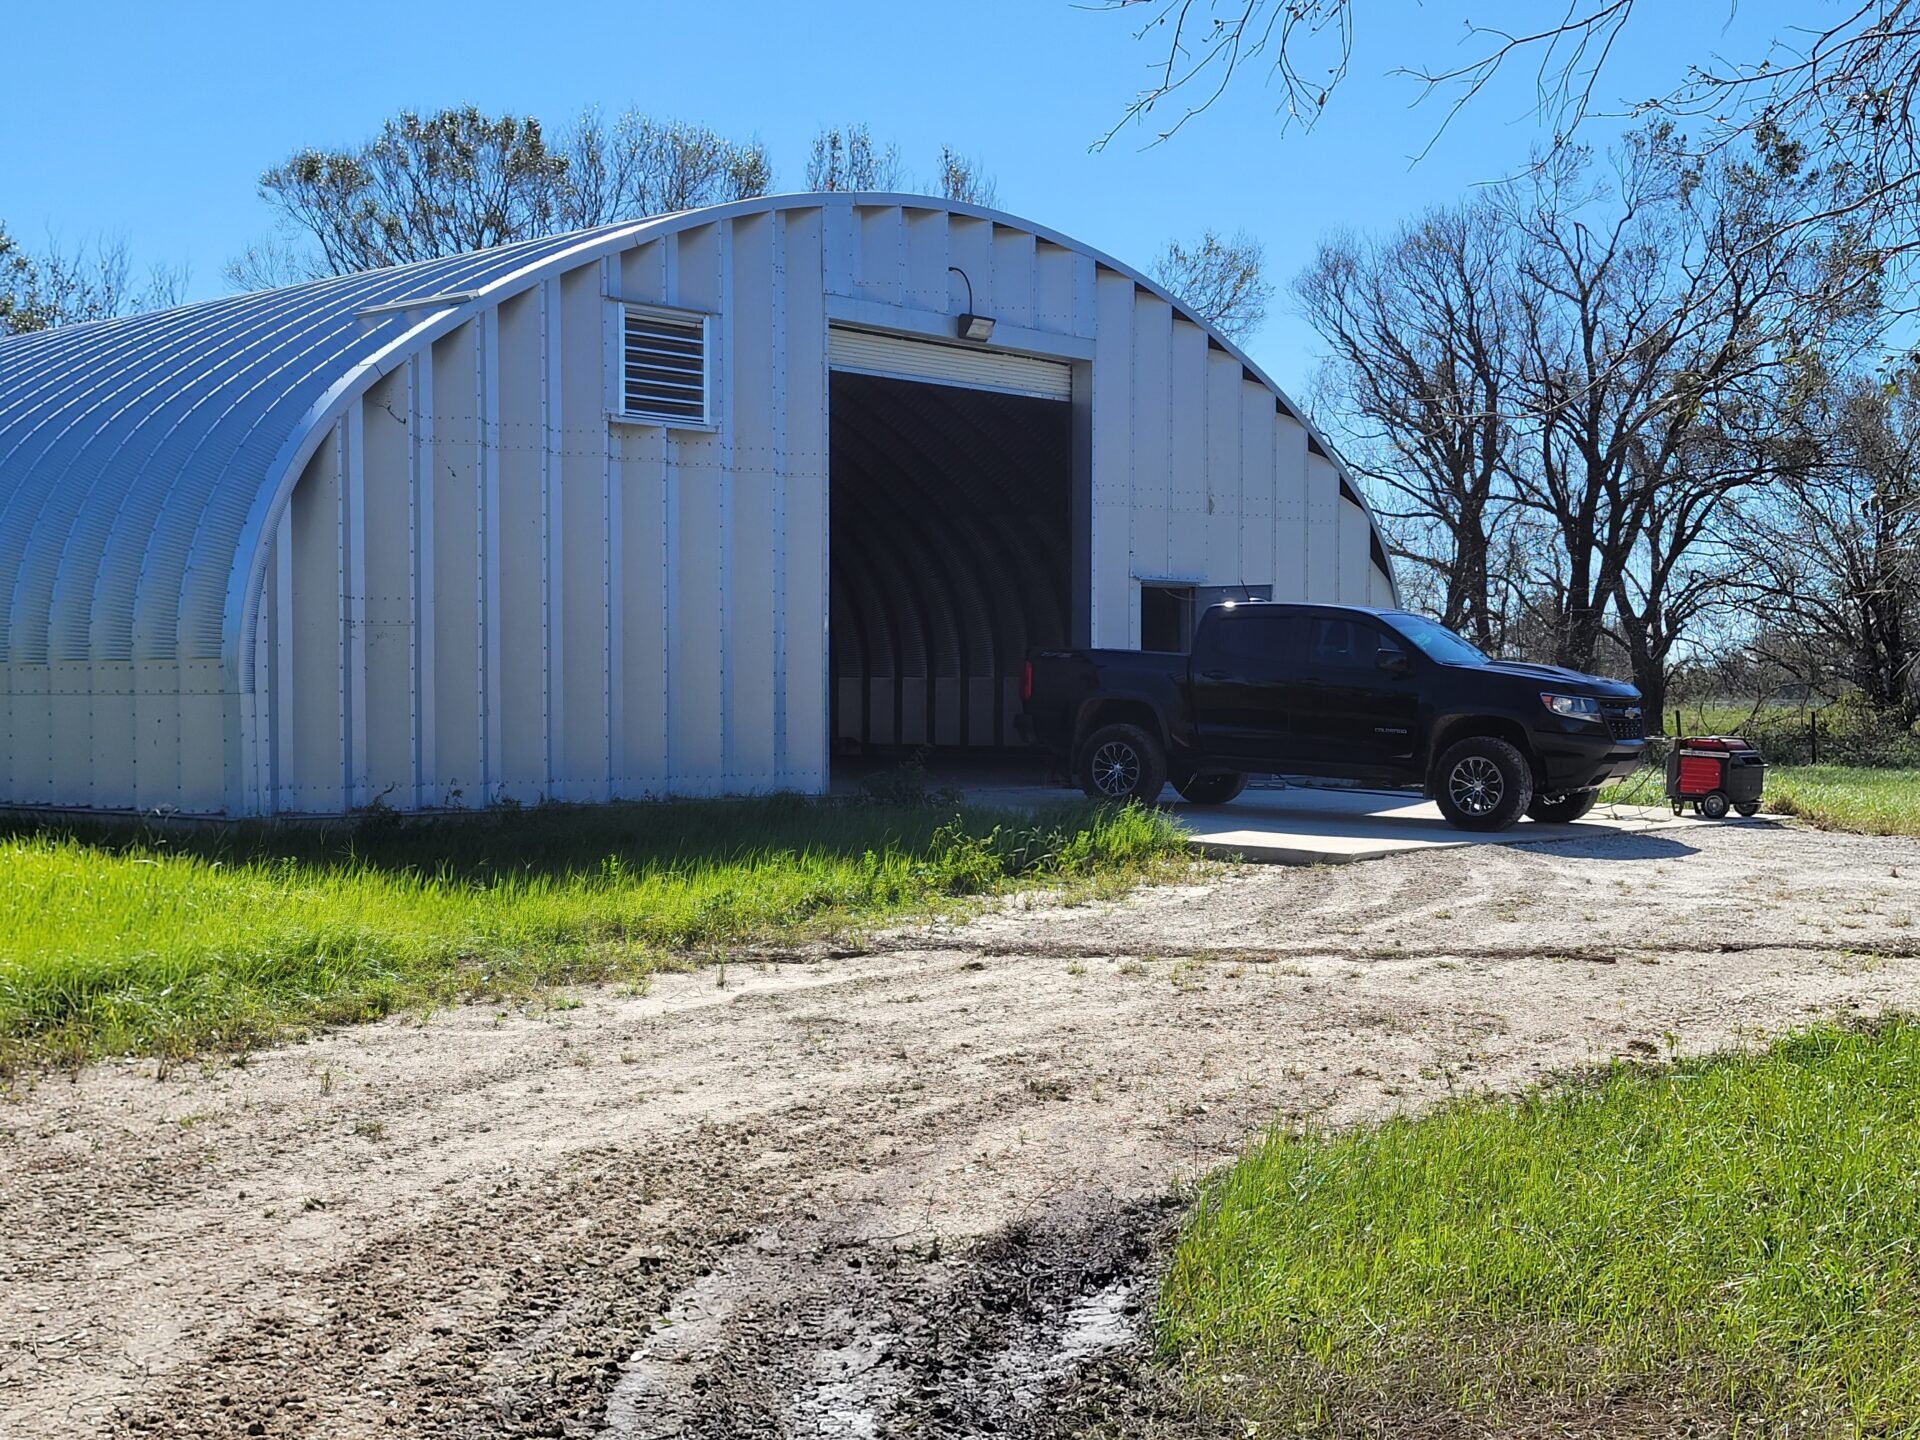 S-Model Quonset hut with steel end wall, vent up top, a black truck in front, and a mud trail leading to the building.